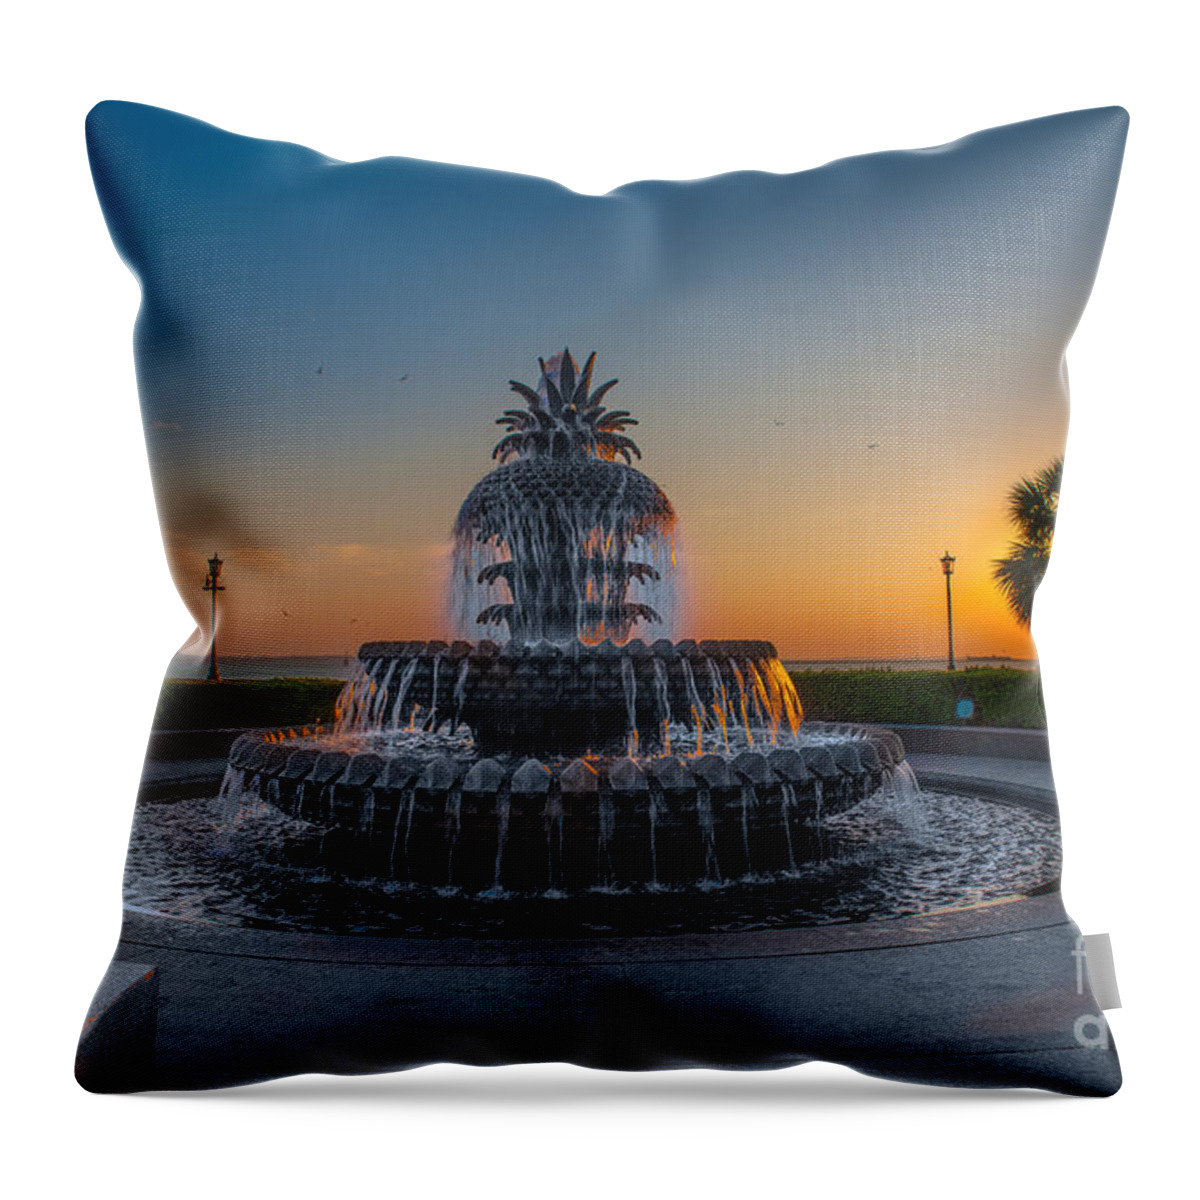 Pineapple Fountain Throw Pillow featuring the photograph Pineapple Glow by Dale Powell